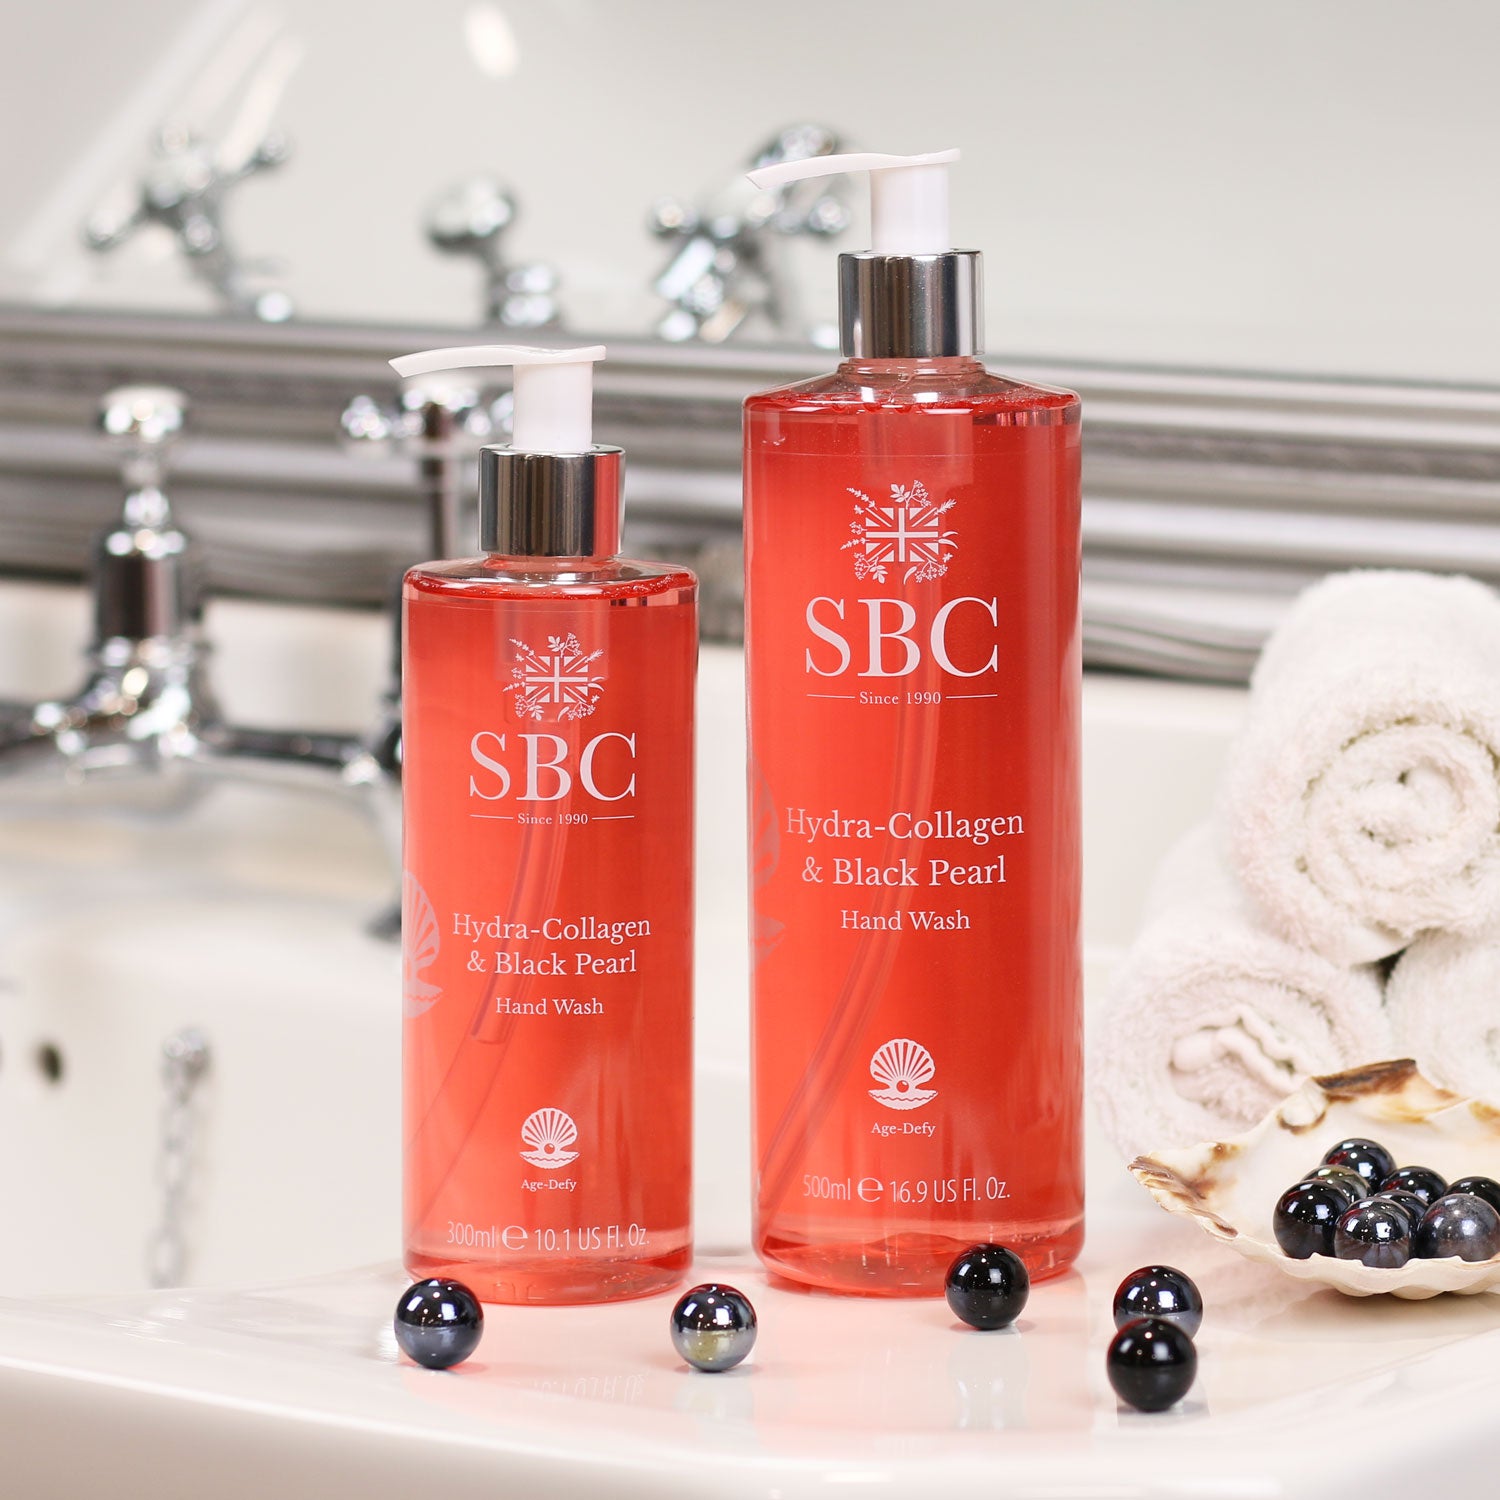 300ml and 500ml Hydra-Collagen & Black Pearl Hand wash on a bathroom sink with black pearls